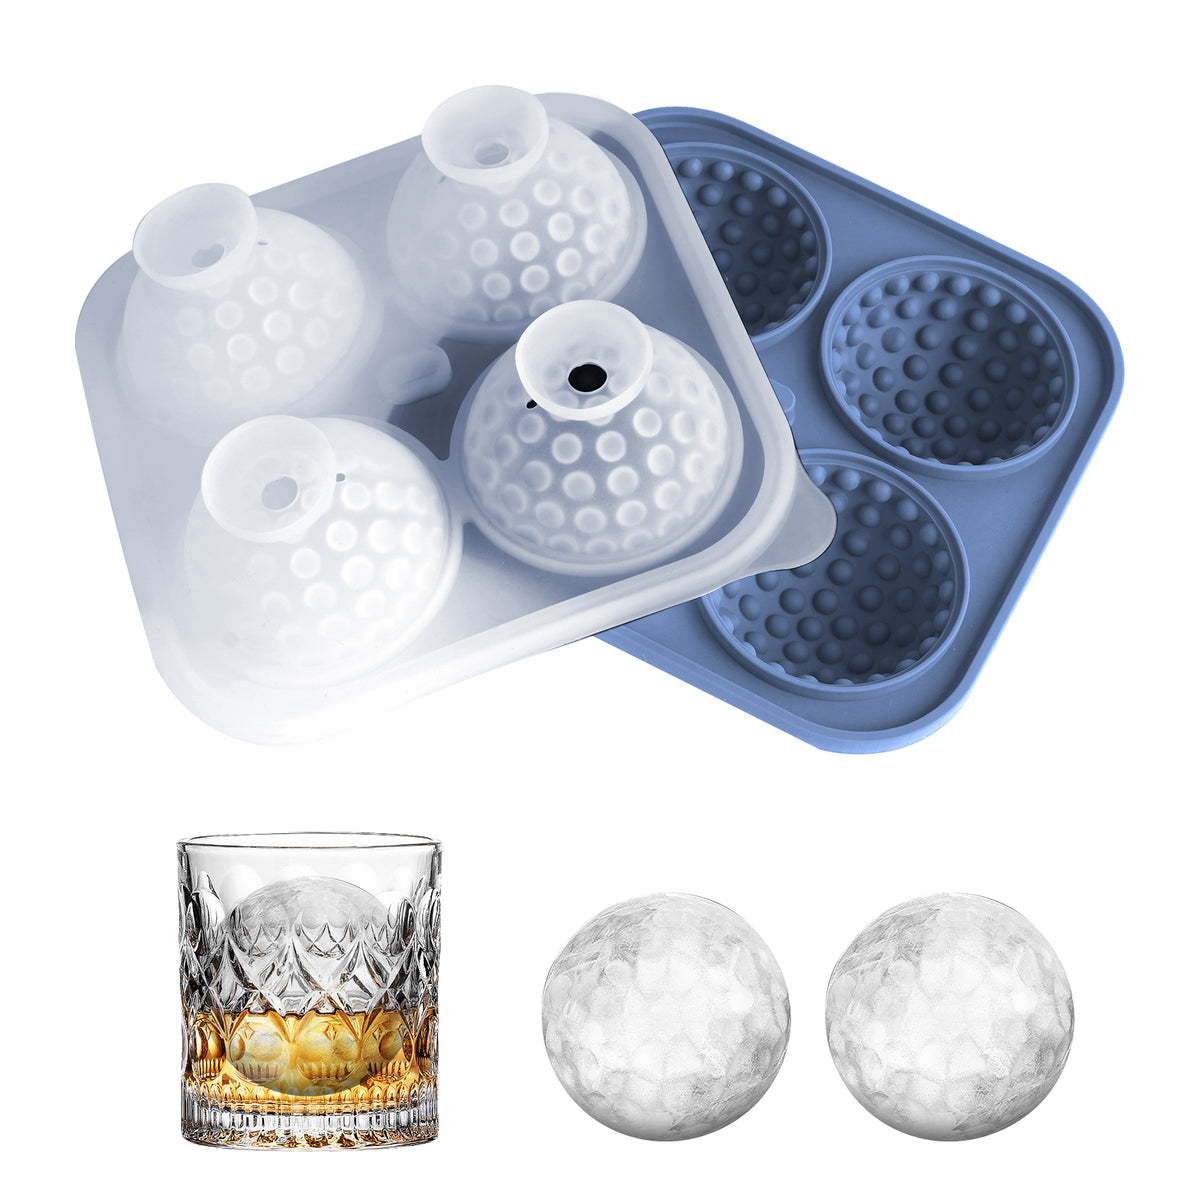 Adorila Large Silicone Ice Cube Tray, 4 Round Slots Ice Cube Trays for Freezer with Lid, Leak-Free Ice Ball Maker Mold for Whiskey, Cocktails, Bourbon (Blue)